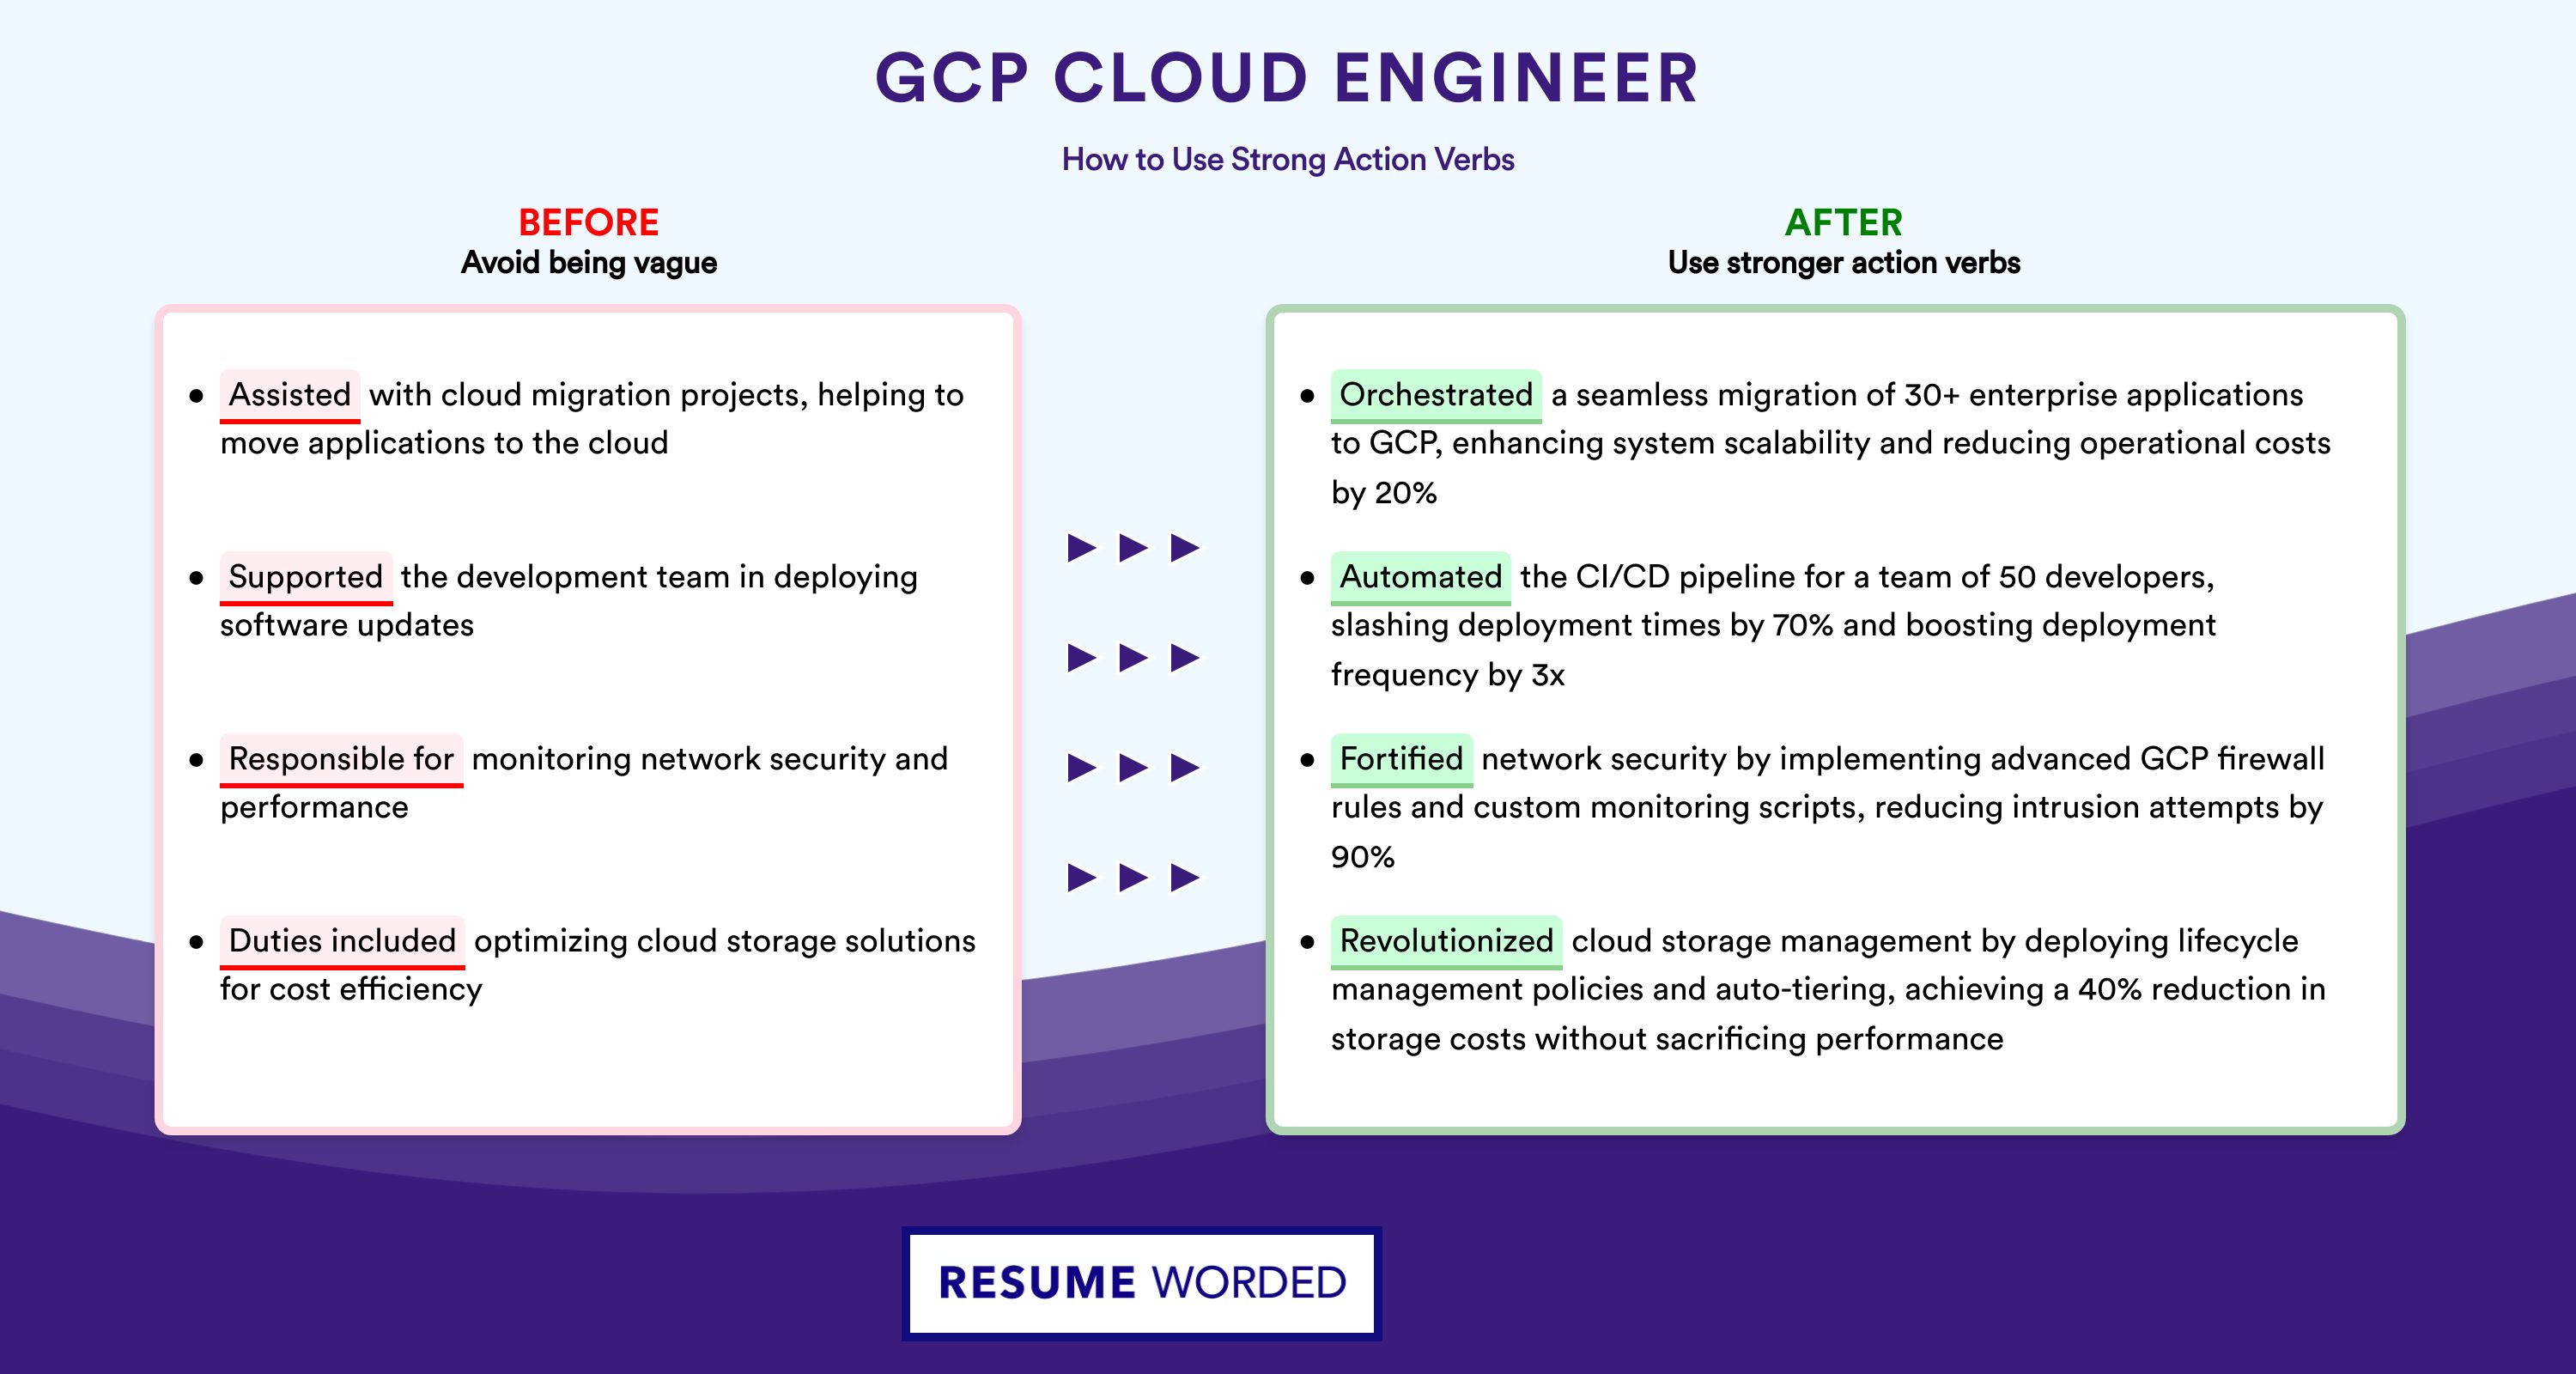 Action Verbs for GCP Cloud Engineer